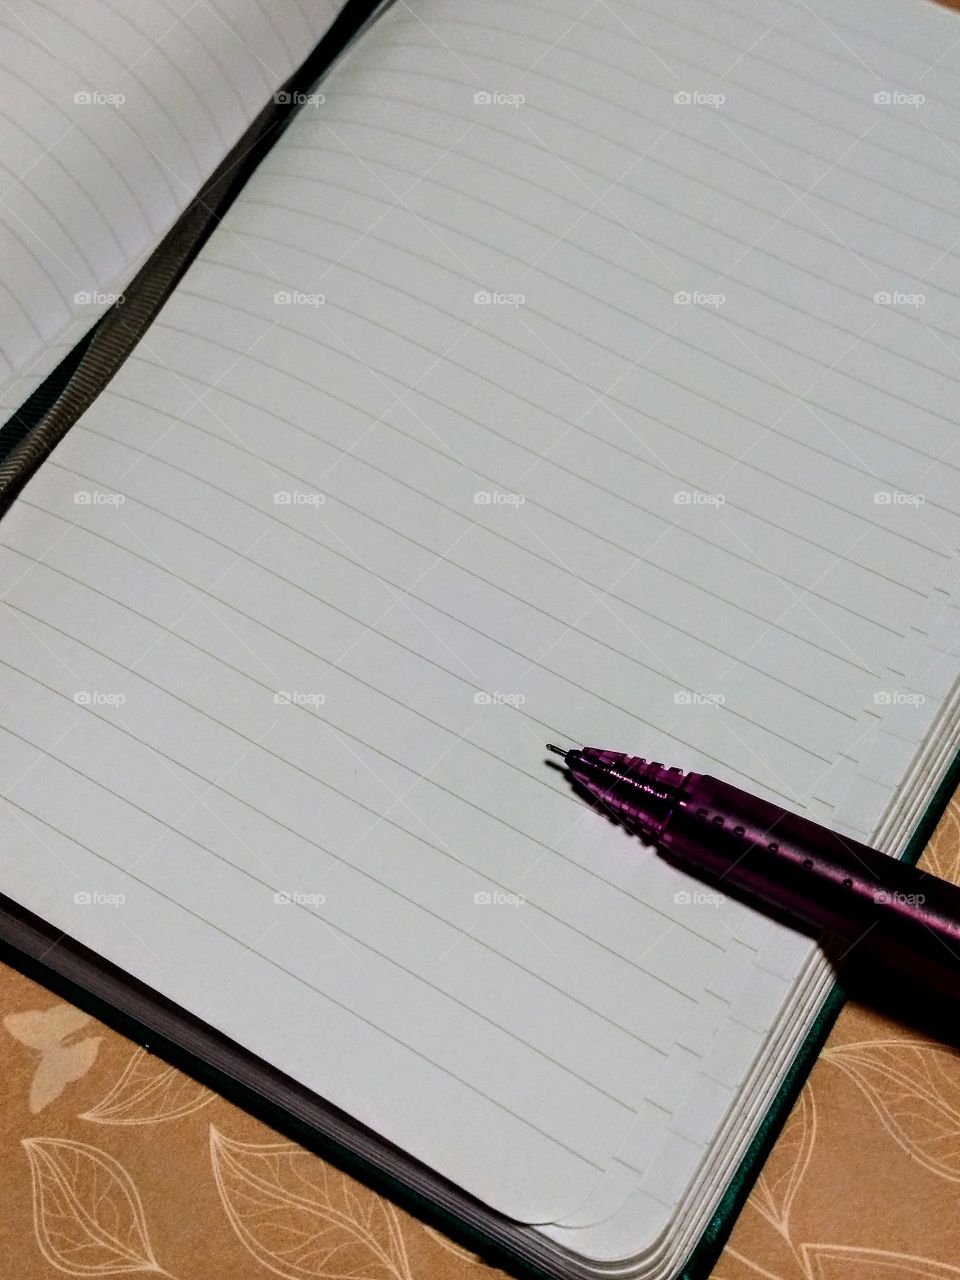 purple pen ready to write in bookmarked journal on pink patterned background